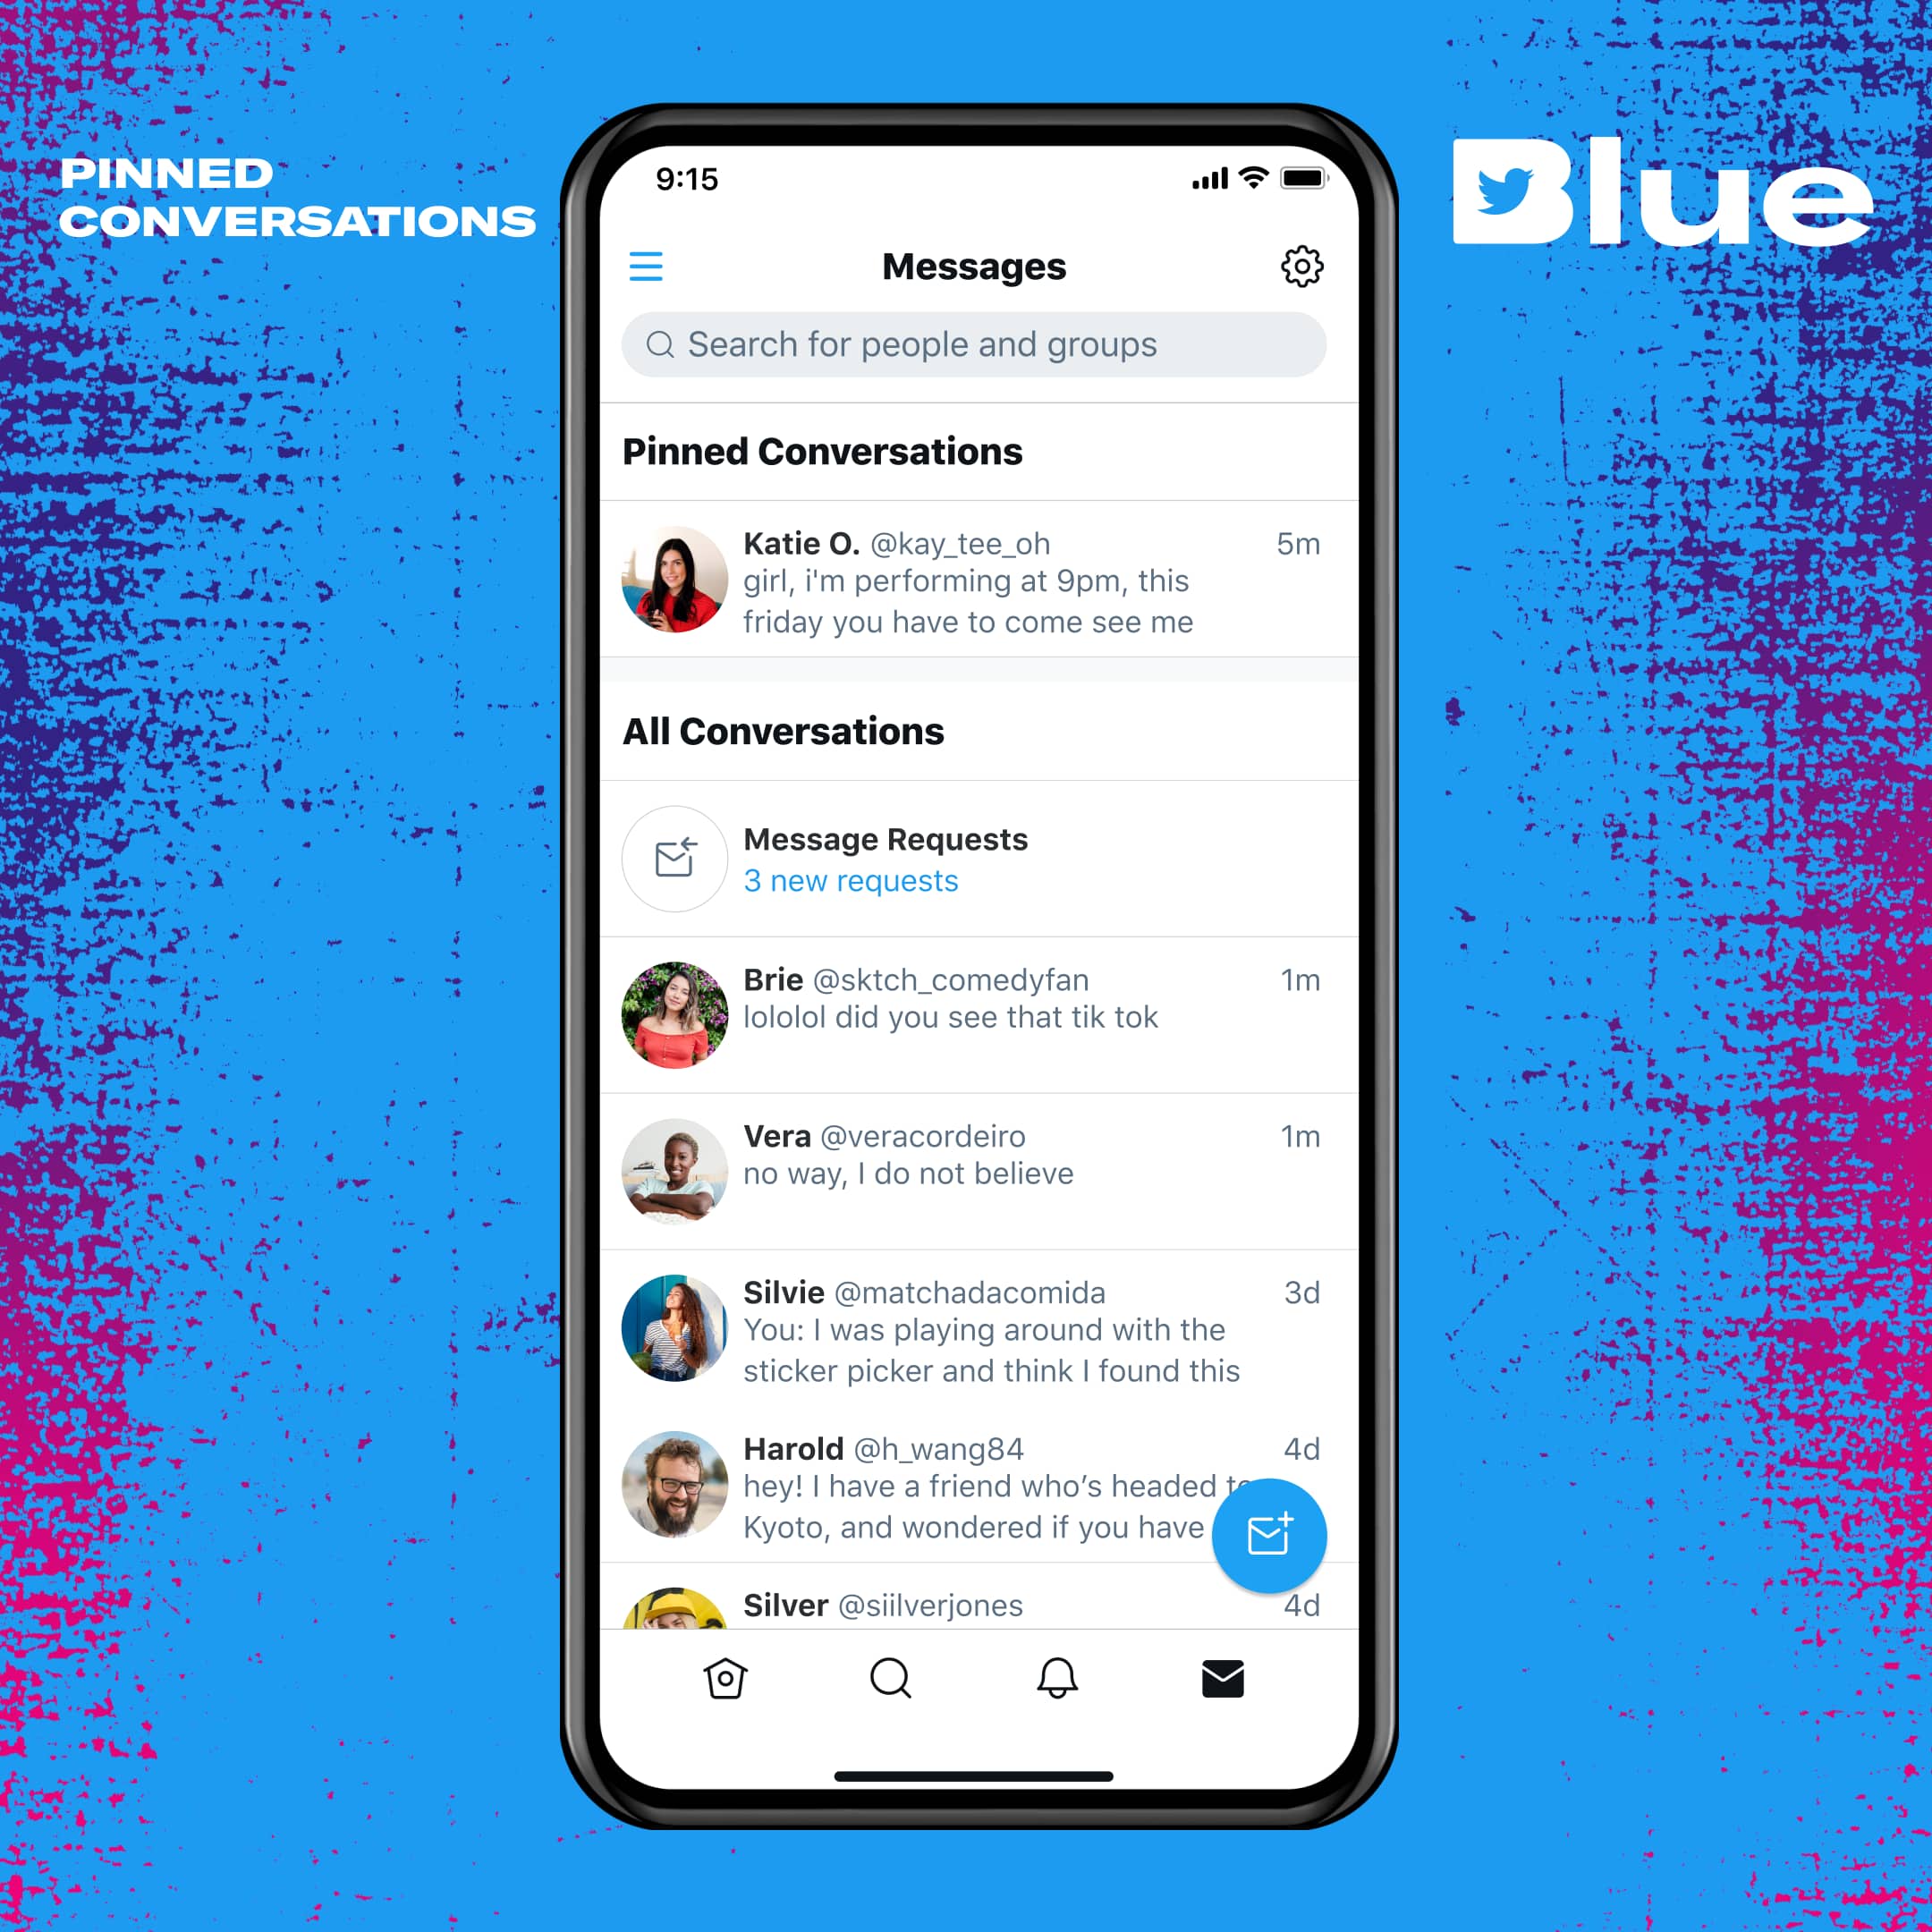 Promotional graphic for the Pinned Conversations feature available with the Twitter Blue subscription on iPhone